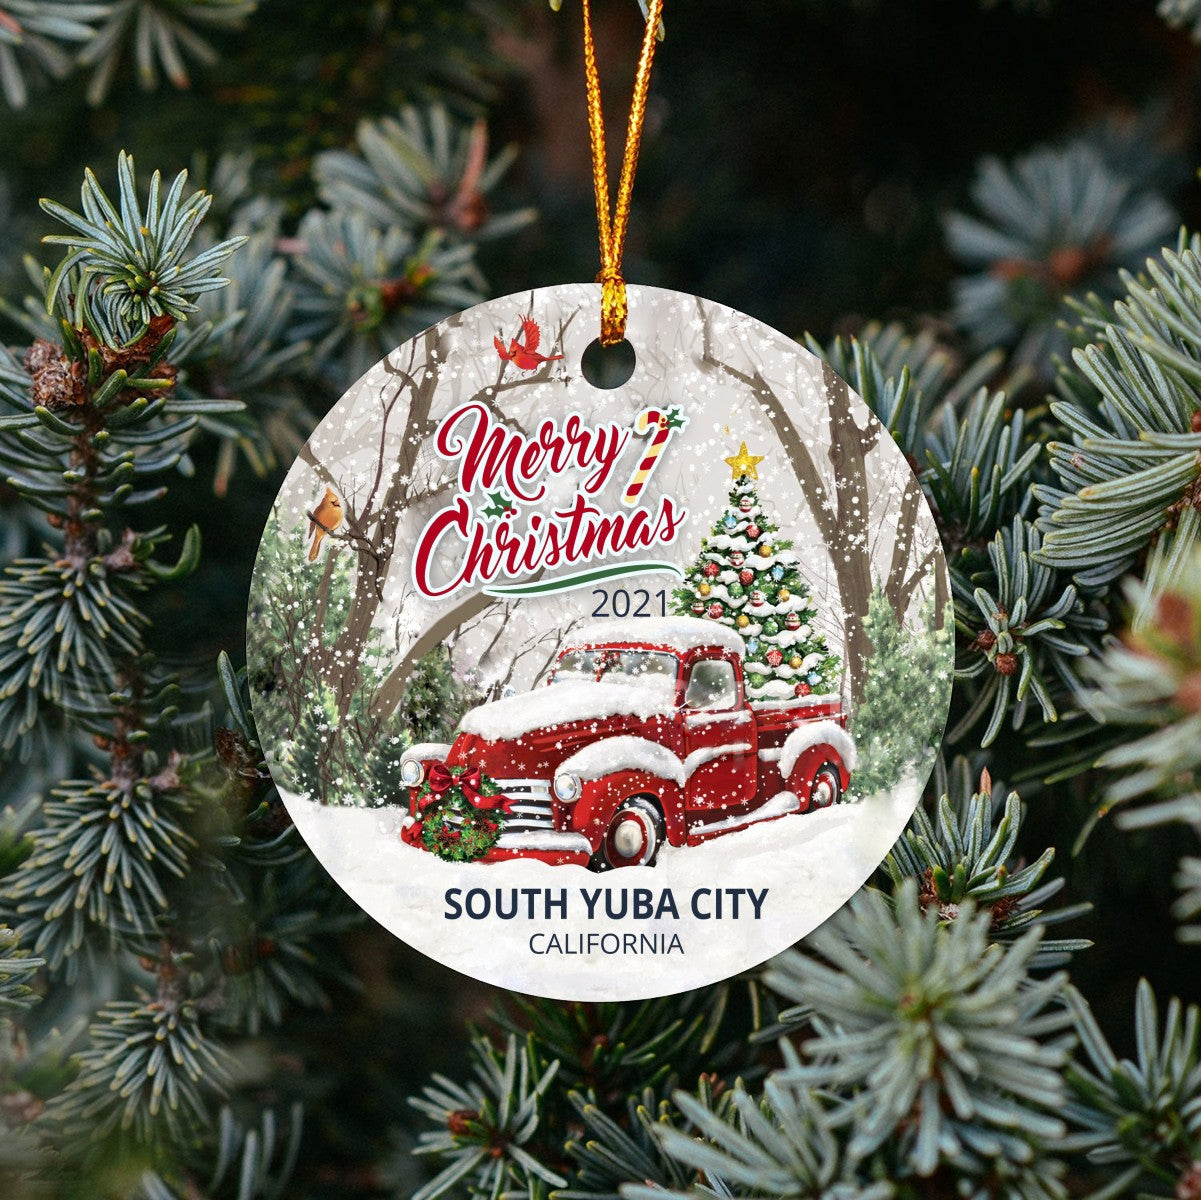 Christmas Tree Ornaments South Yuba City - Ornament With Name City, State South Yuba City California CA Ornament - Red Truck Xmas Ornaments 3'' Plastic Gift For Family, Friend And Housewarming